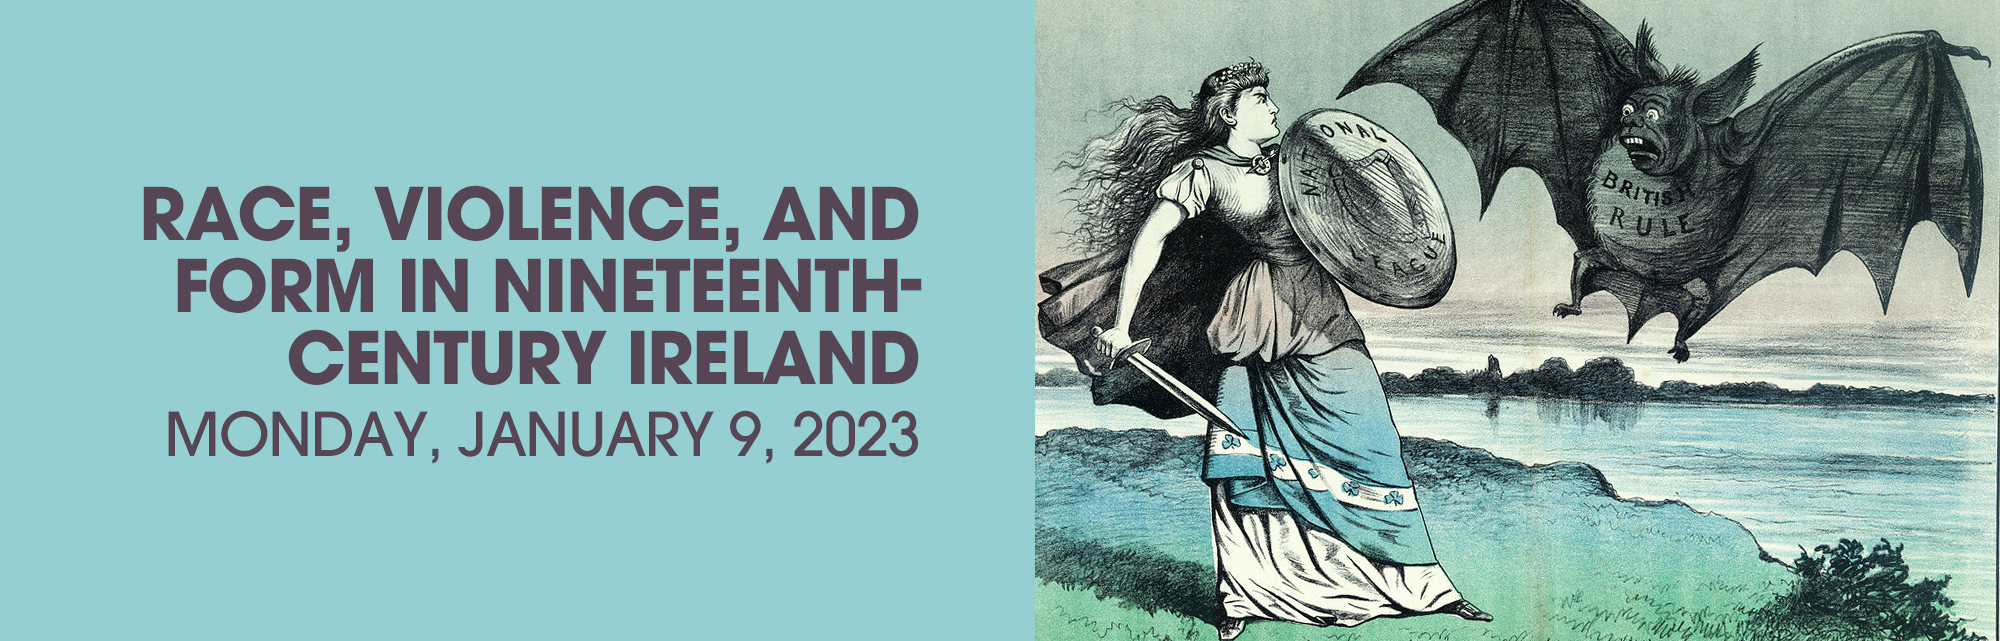 Race, Violence, and Form in Nineteenth-Century Ireland confernece